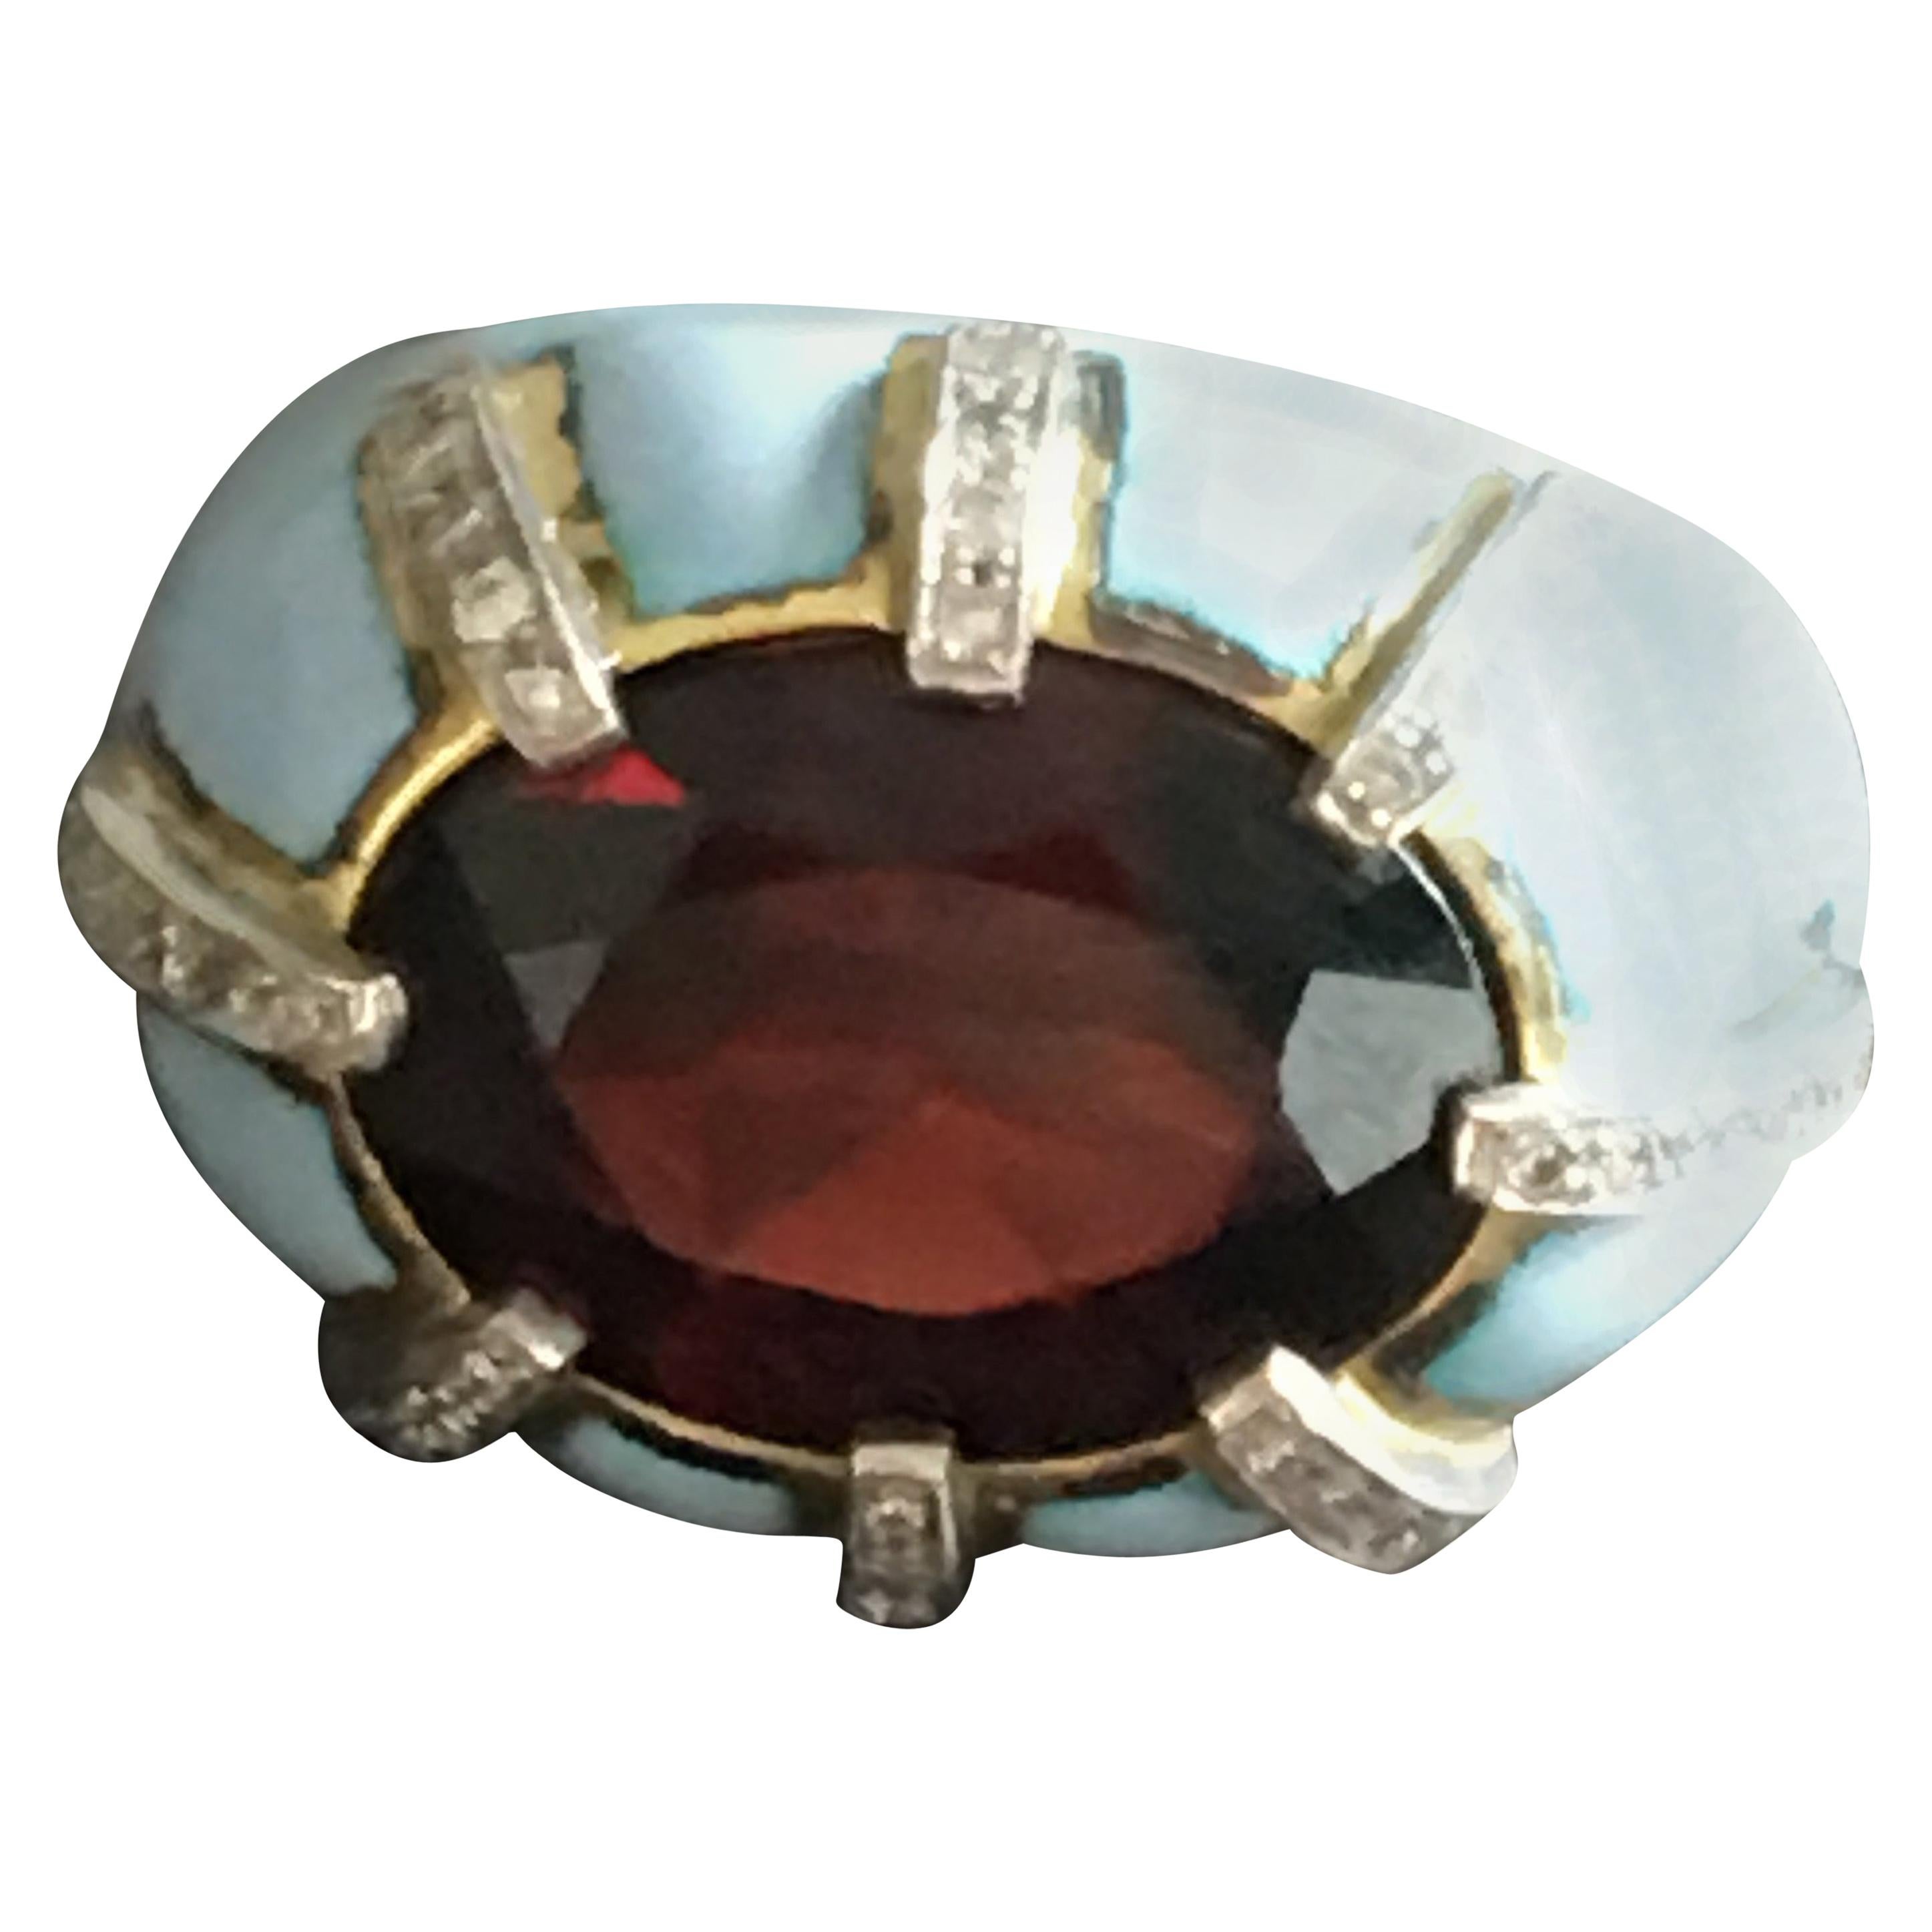 Ring with faced garnet 10ct, baby blu enamel, 18kt White and Yellow gold gr 19,80,  diamonds ct 0,95.
Measure 5 US.
All Giulia Colussi jewelry is new and has never been previously owned or worn. Each item will arrive at your door beautifully gift